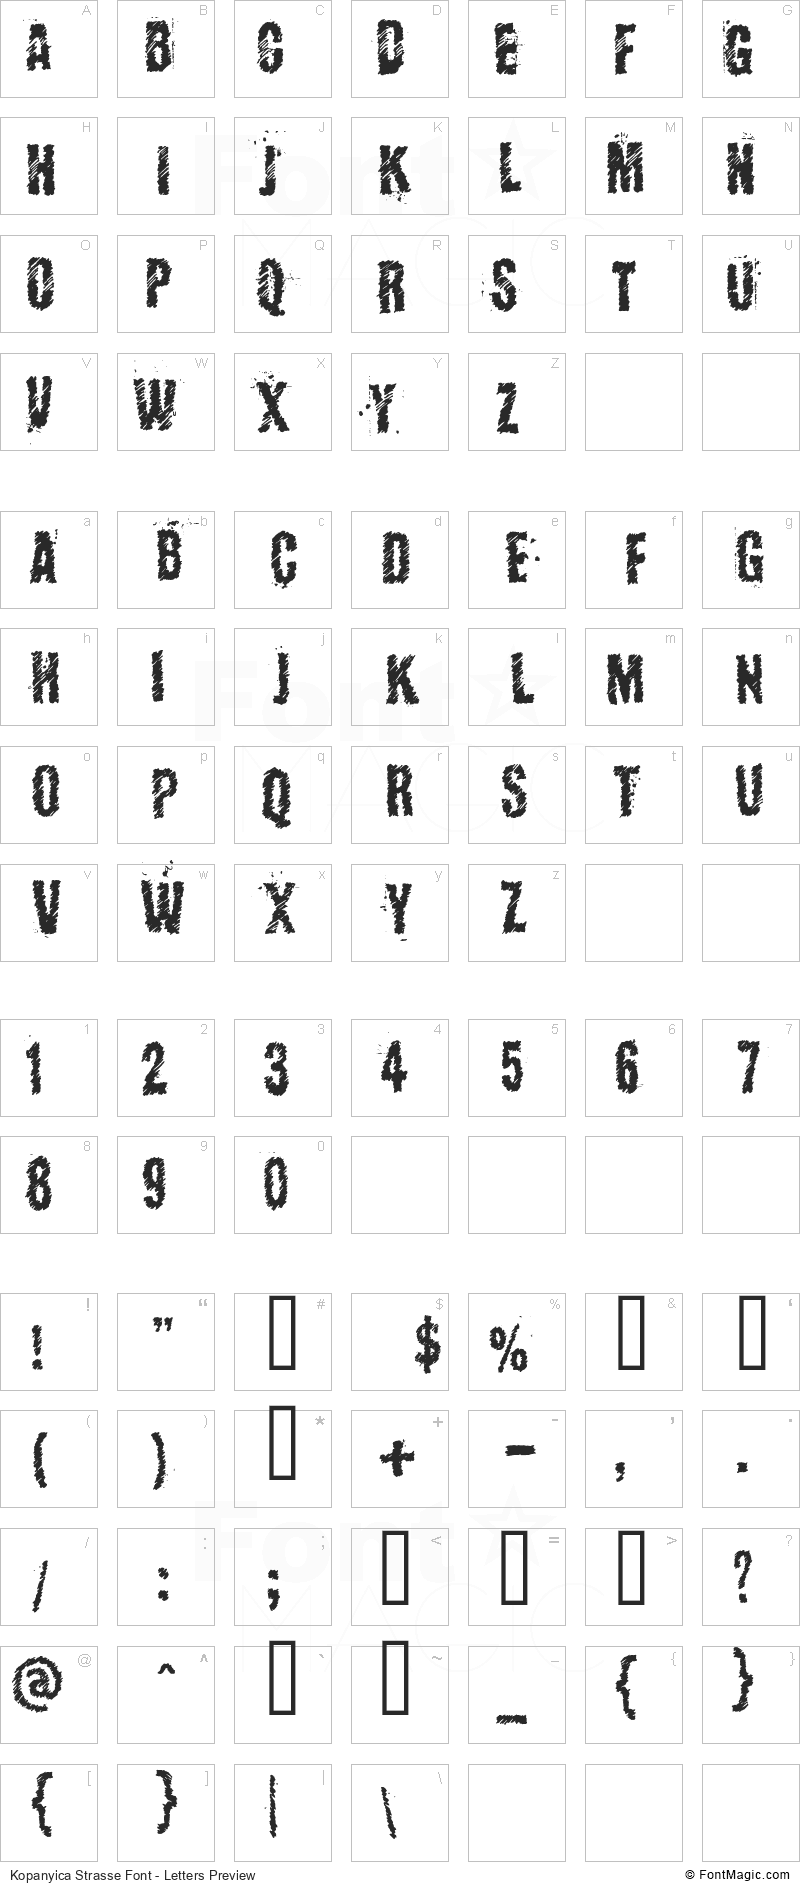 Kopanyica Strasse Font - All Latters Preview Chart